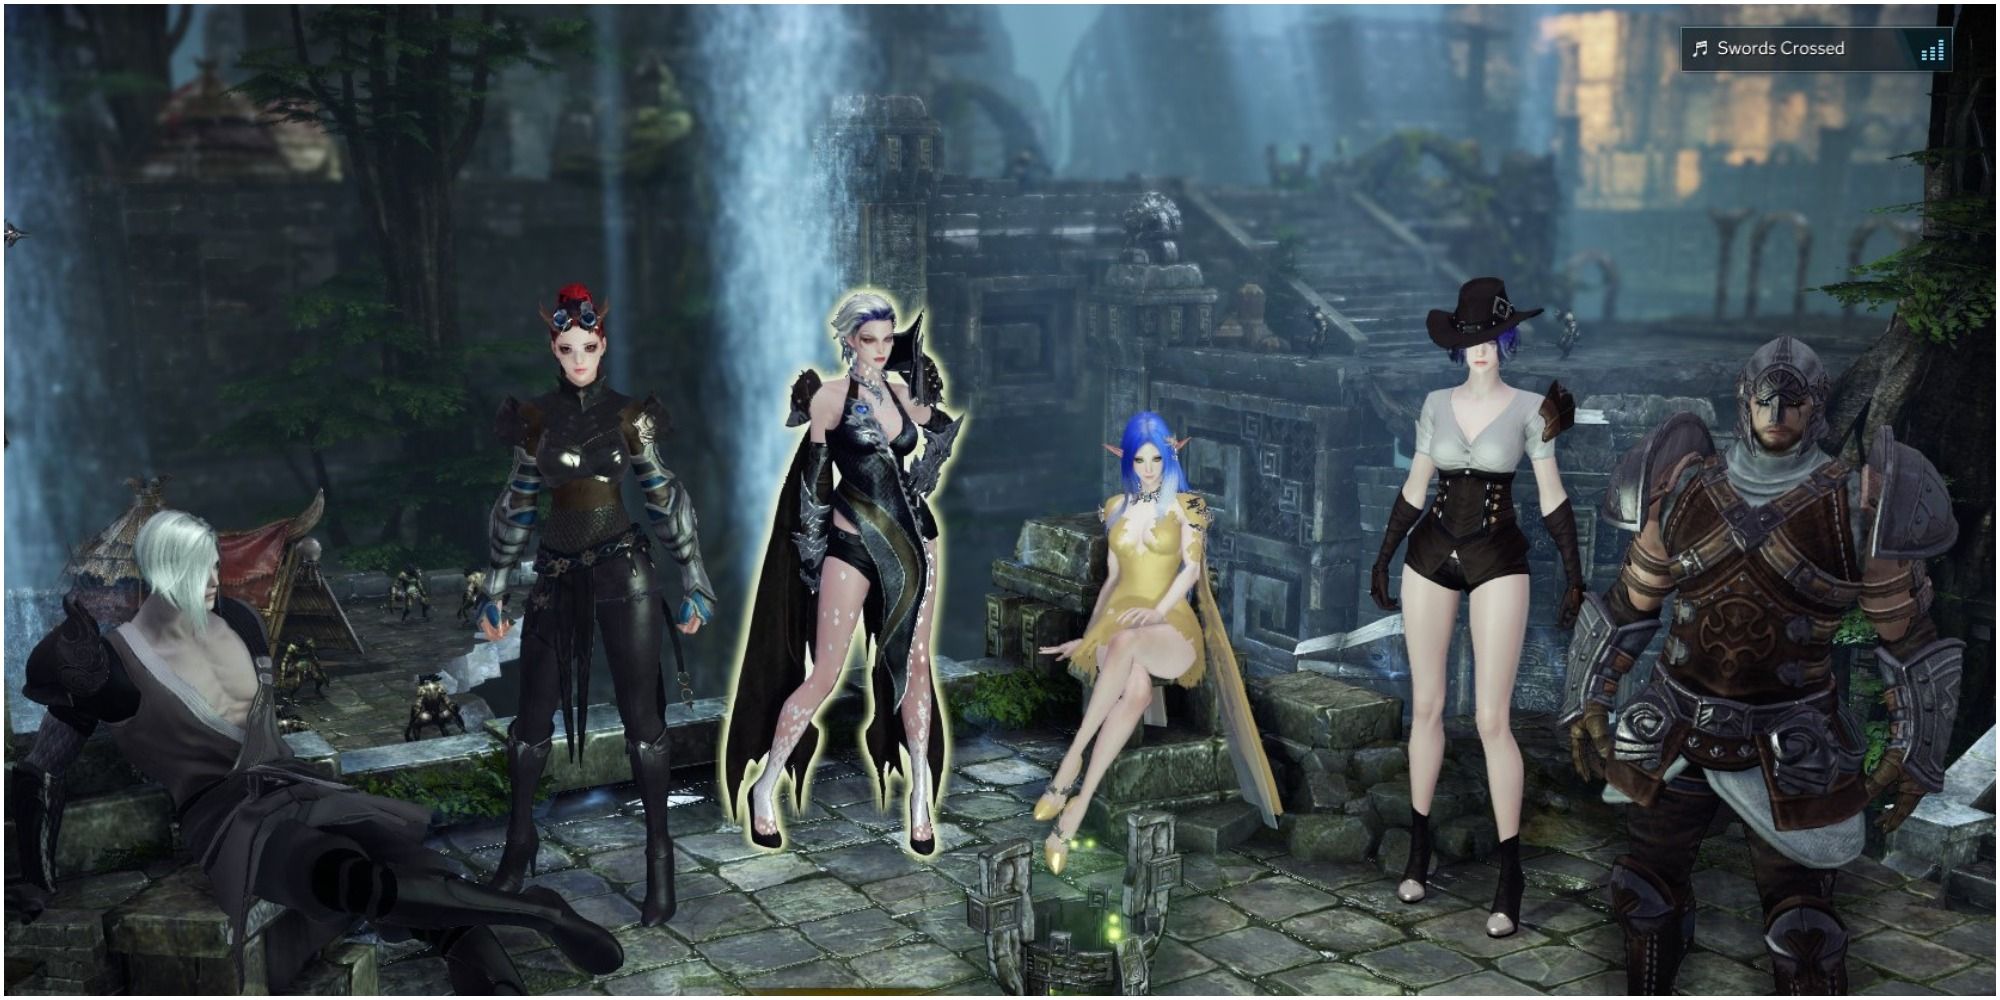 Lost Ark roster screen of 6 characters with Morai Ruins and waterfall in the background